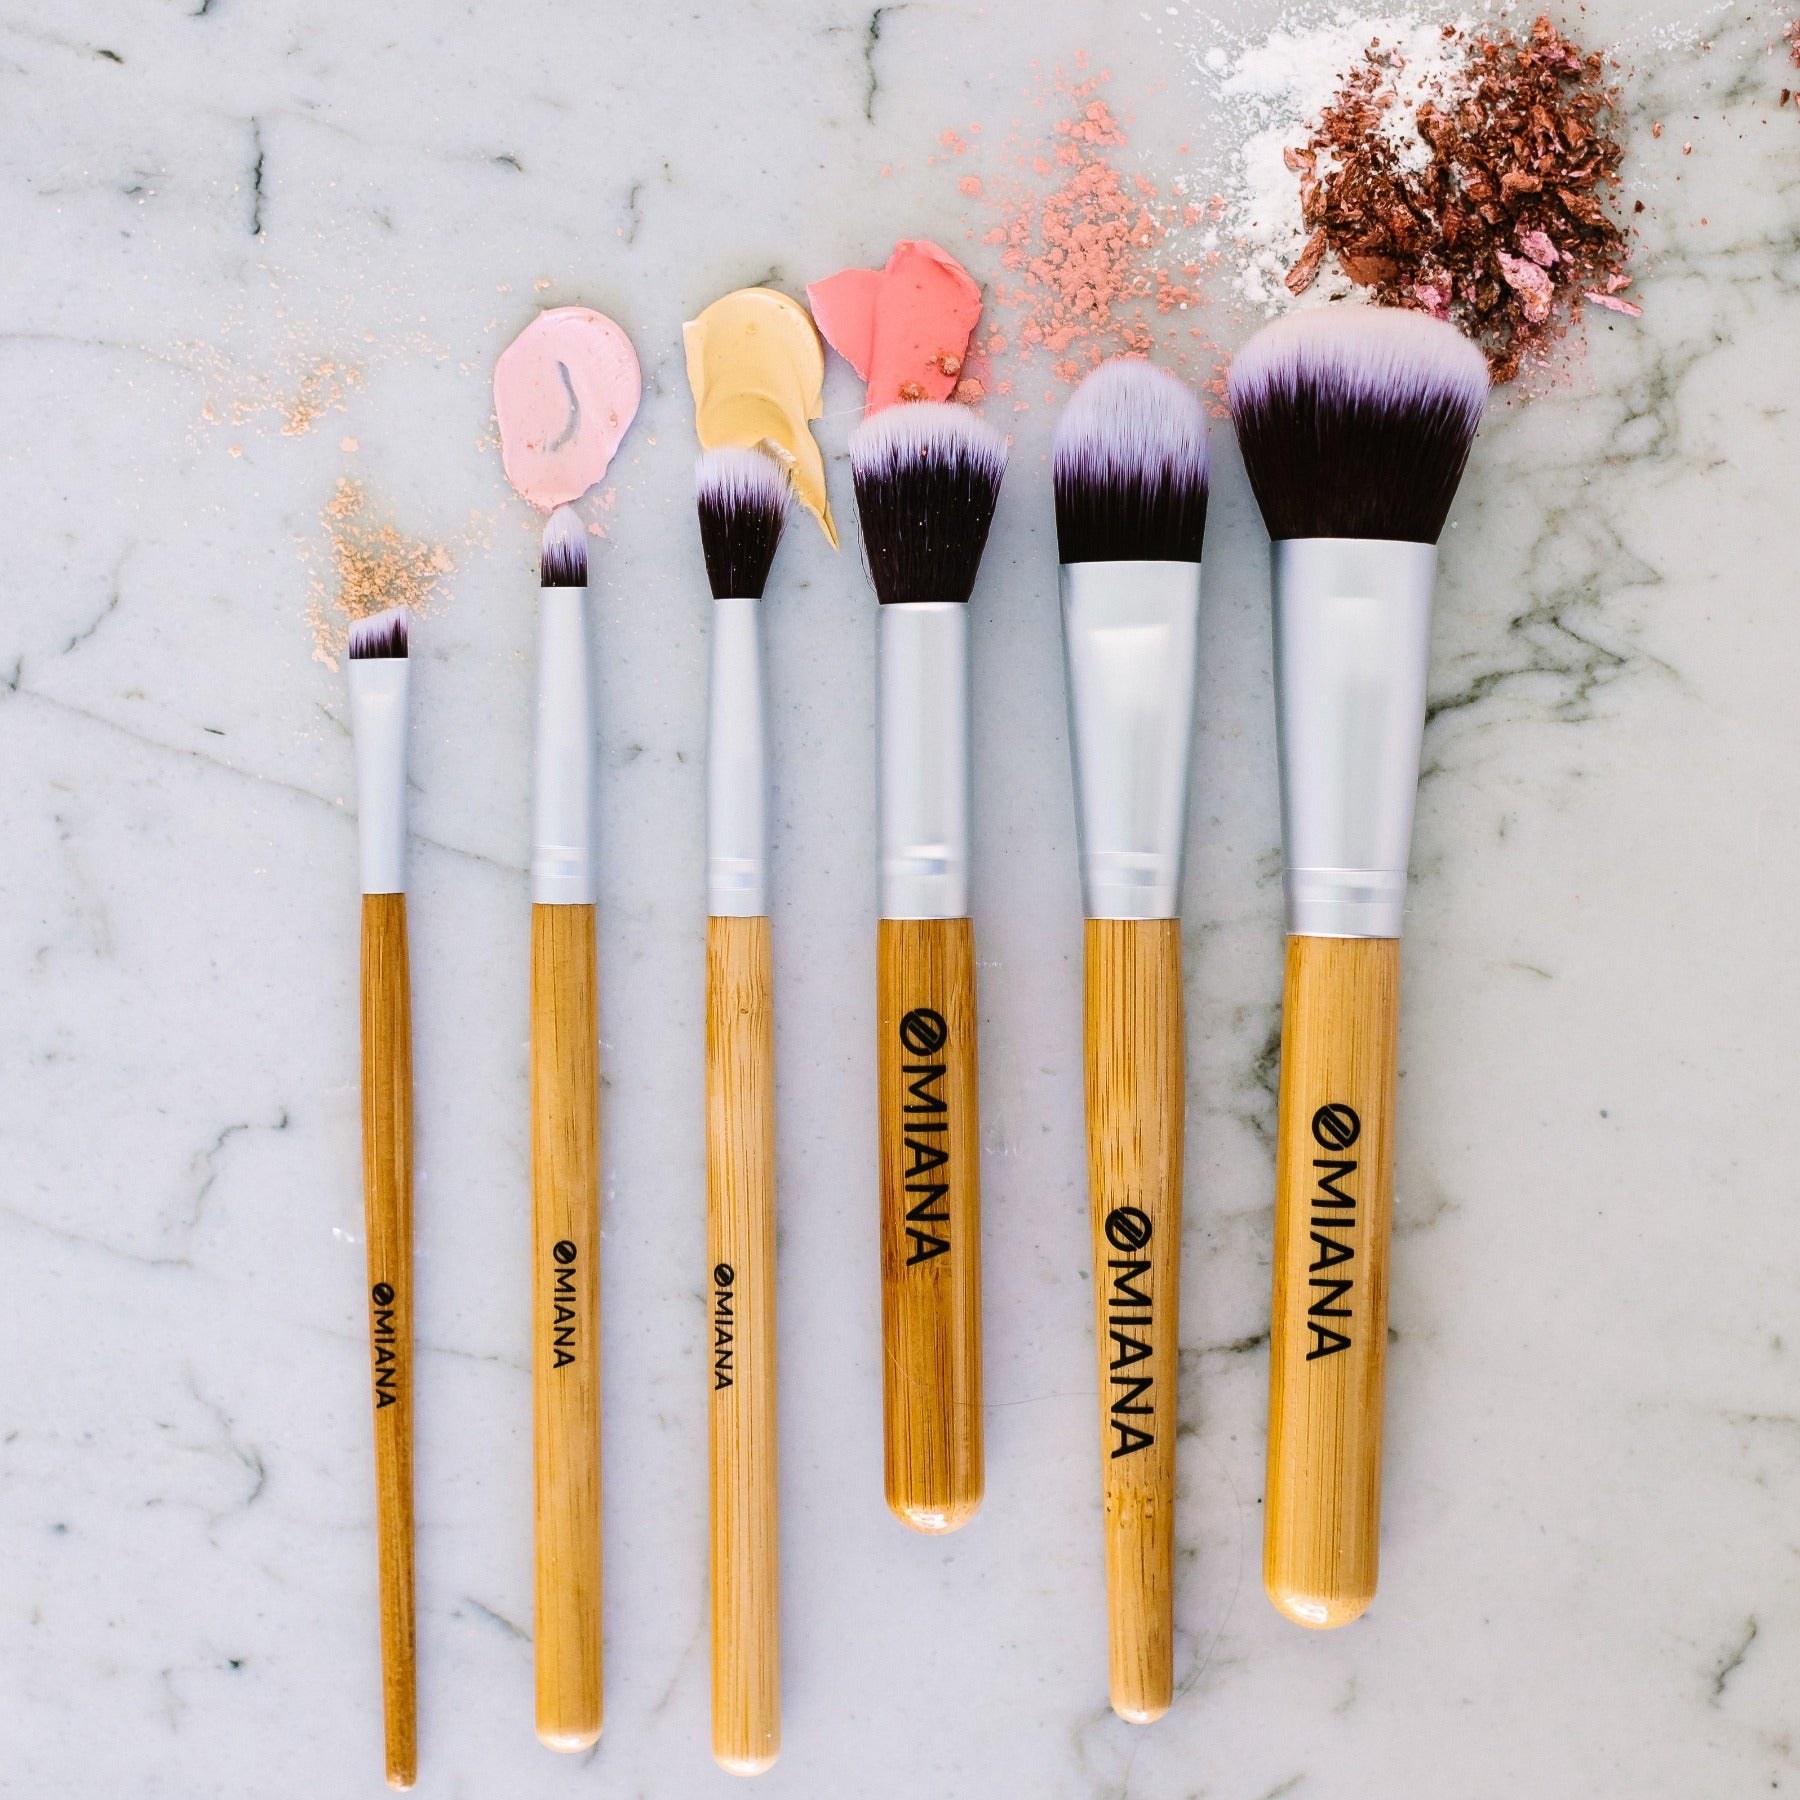 Stroke of Beauty - Set of 12: Makeup Brushes